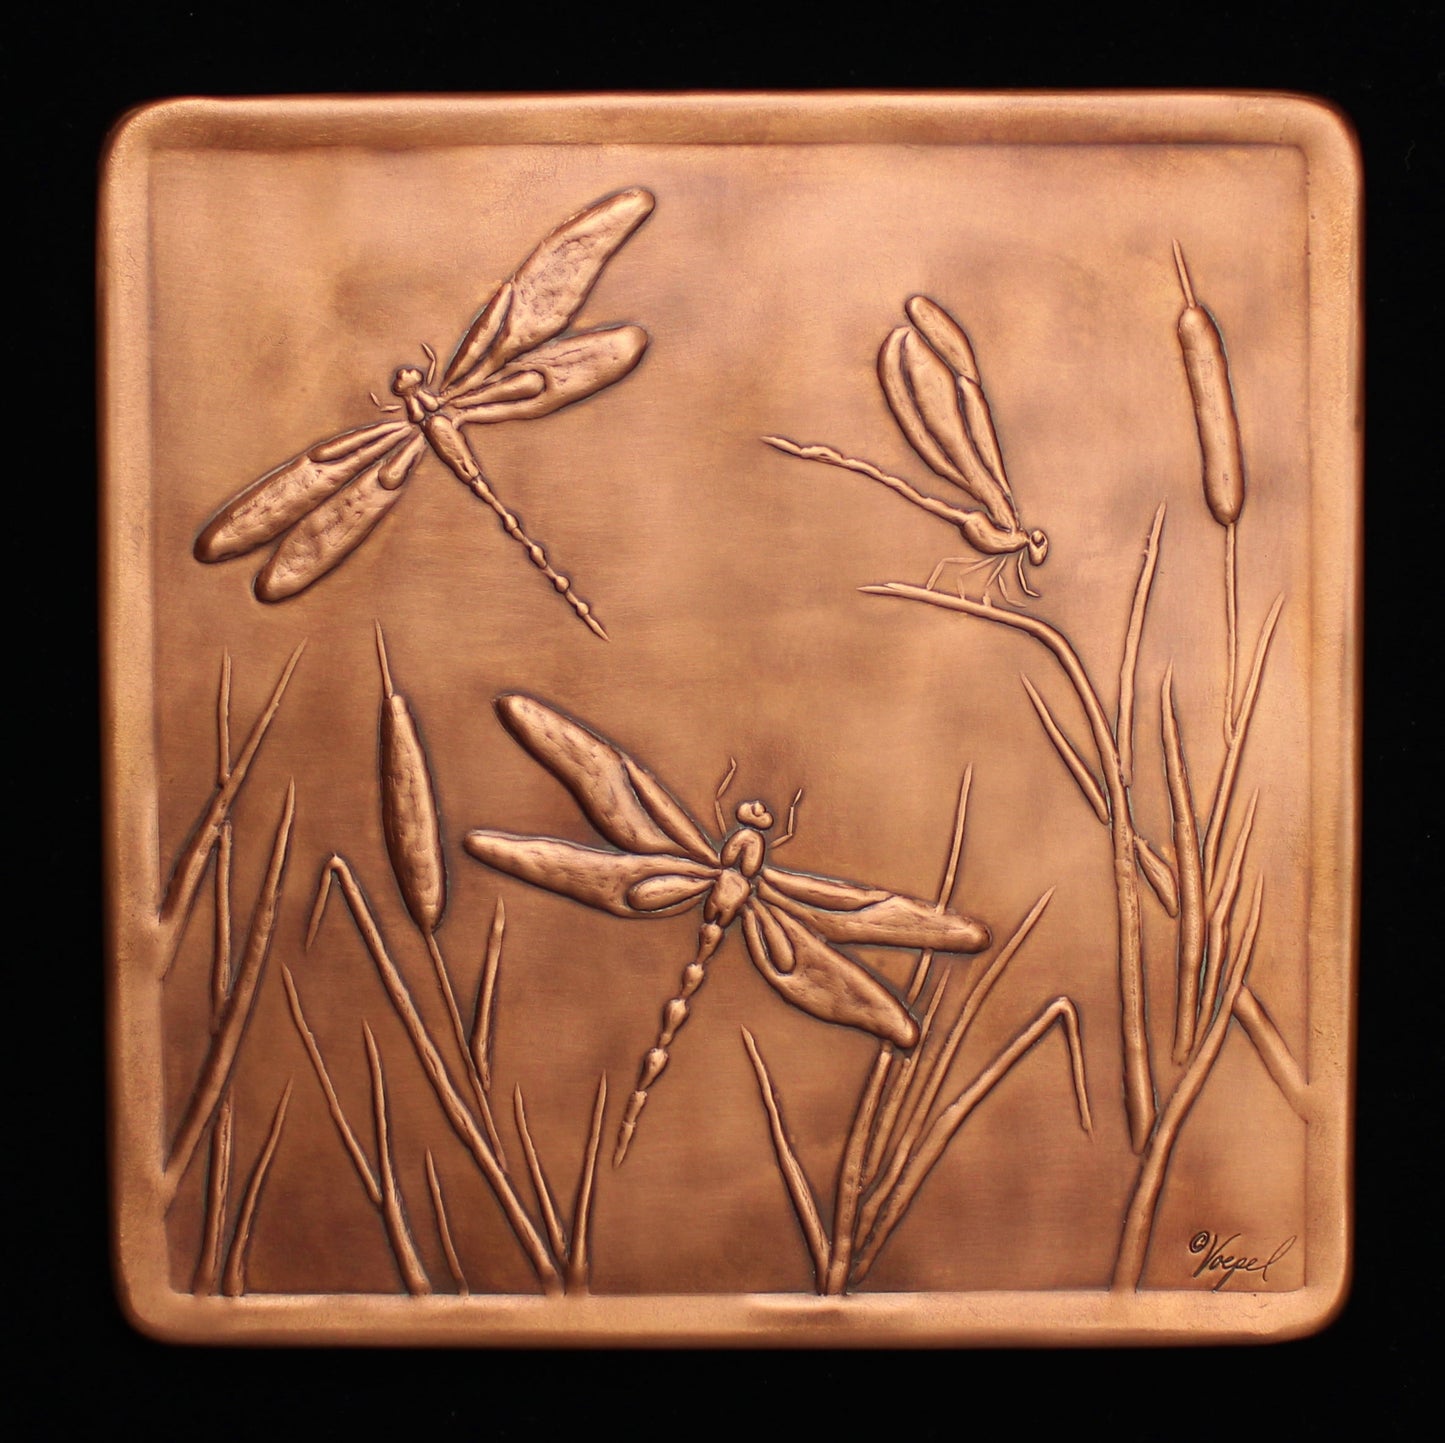 Dragonfly Copper Tile, 9" x 9" x 1/4"